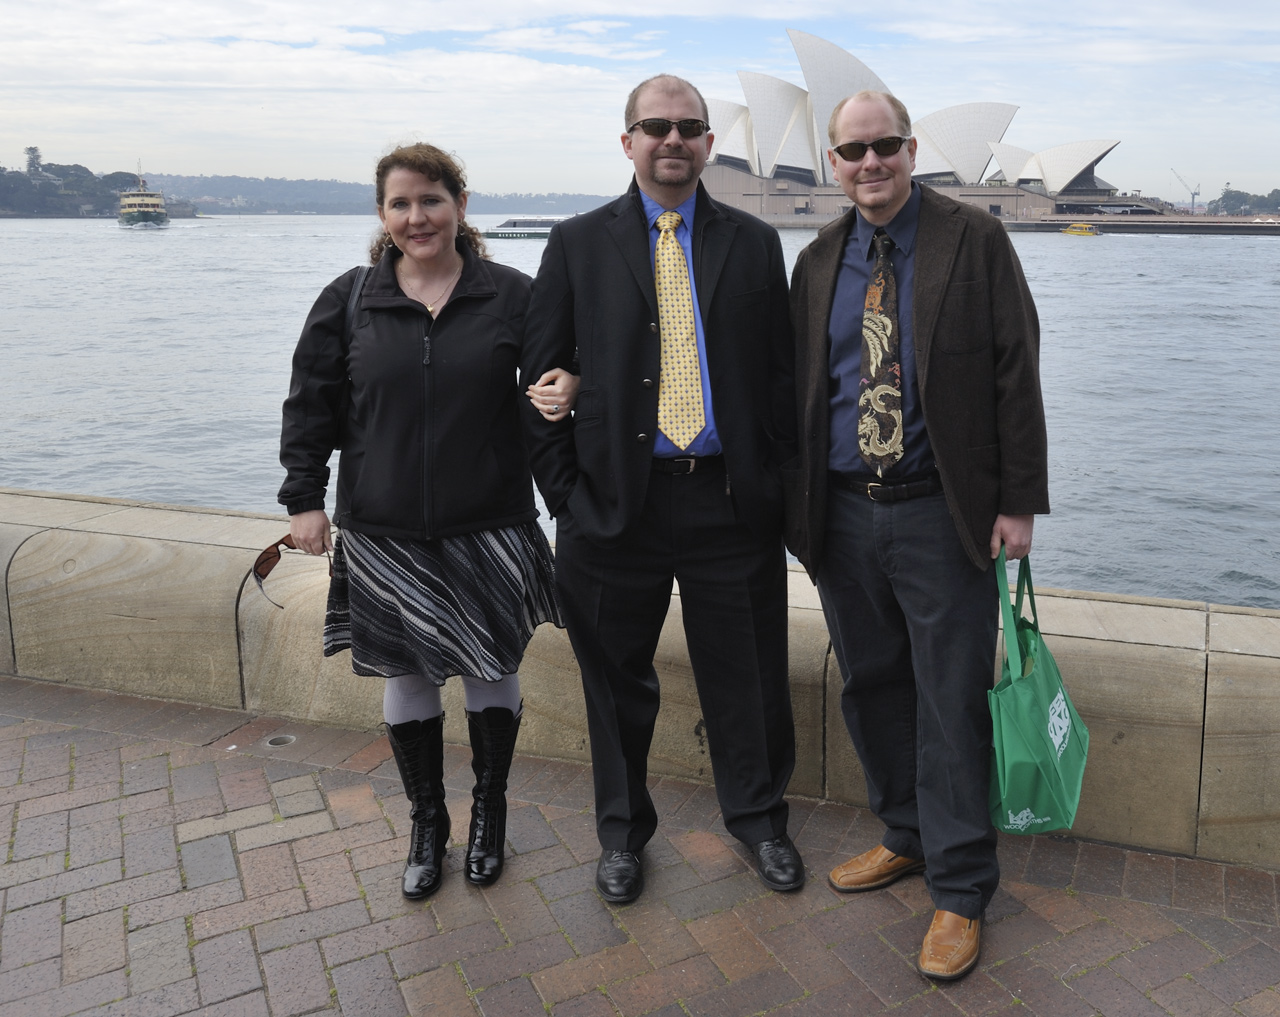 Jackie and Steve and Marc in front of Sydney Harbor